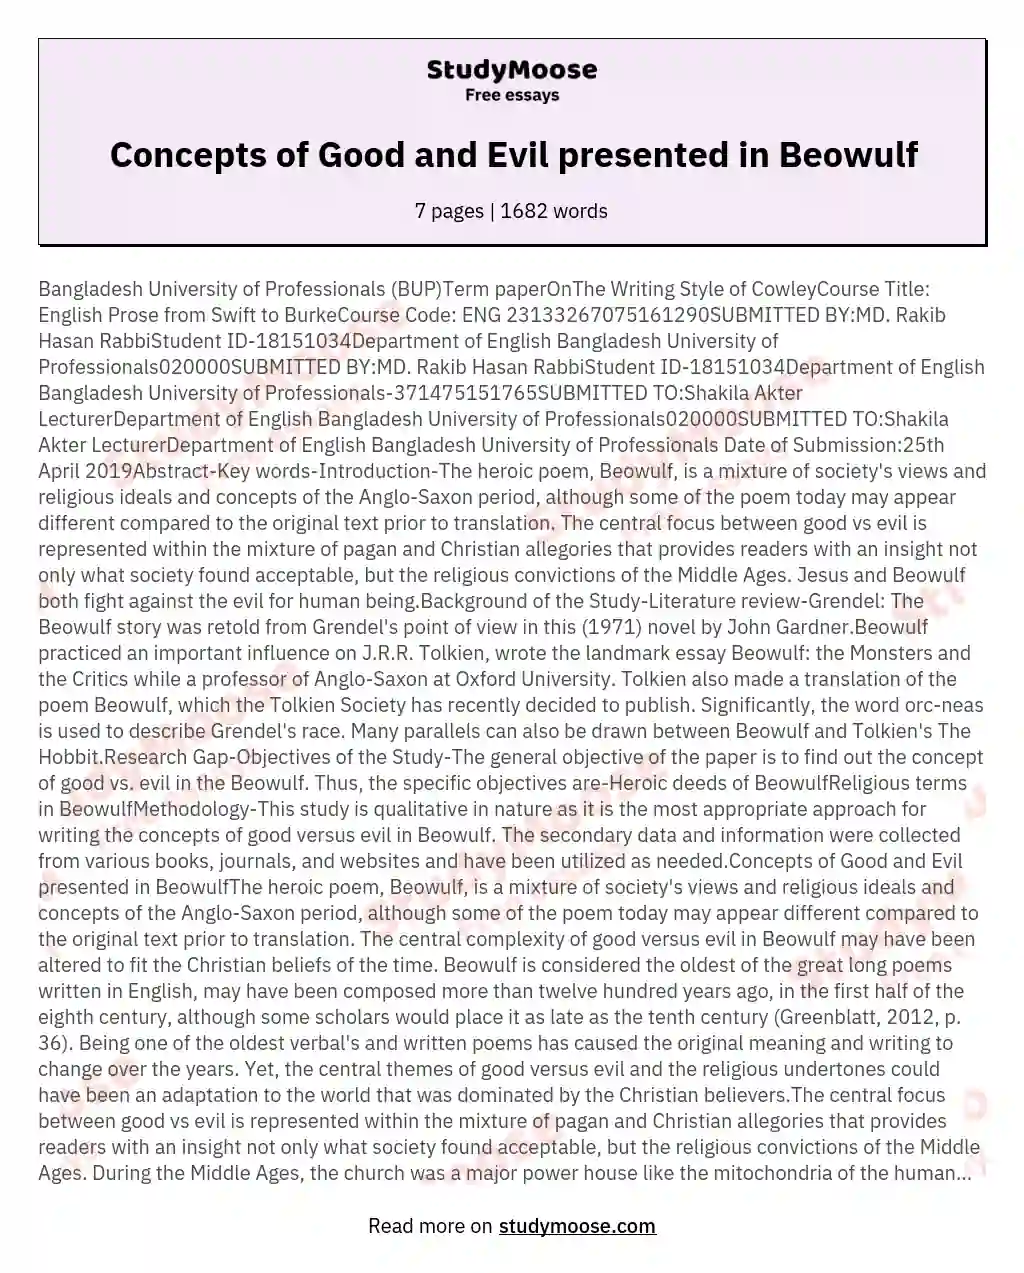 Concepts of Good and Evil presented in Beowulf essay